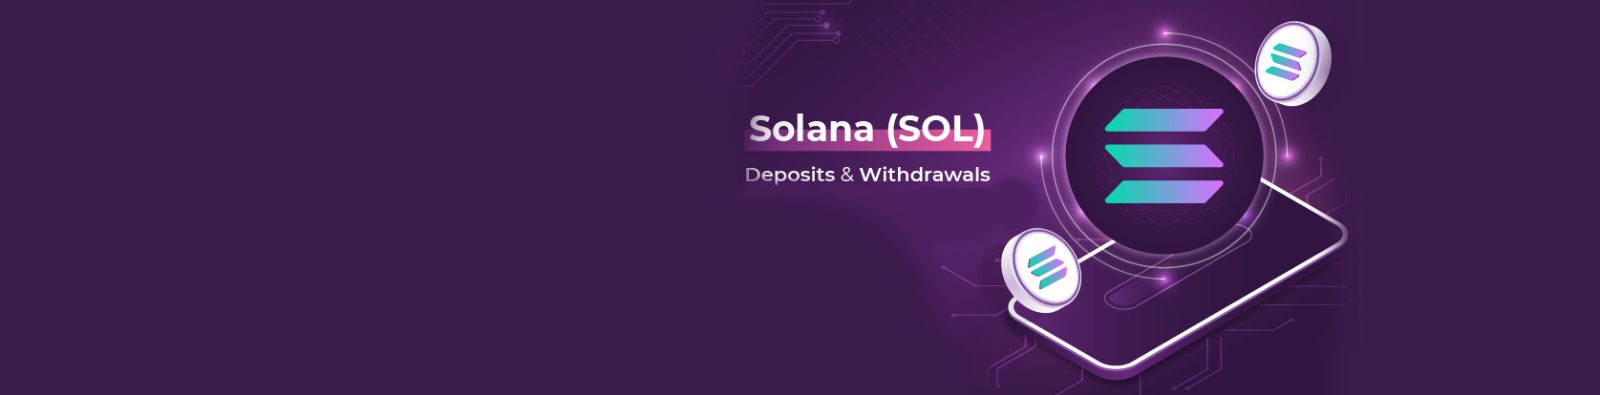 How To Use Solana For Deposit And Withdrawal At Crash Casino